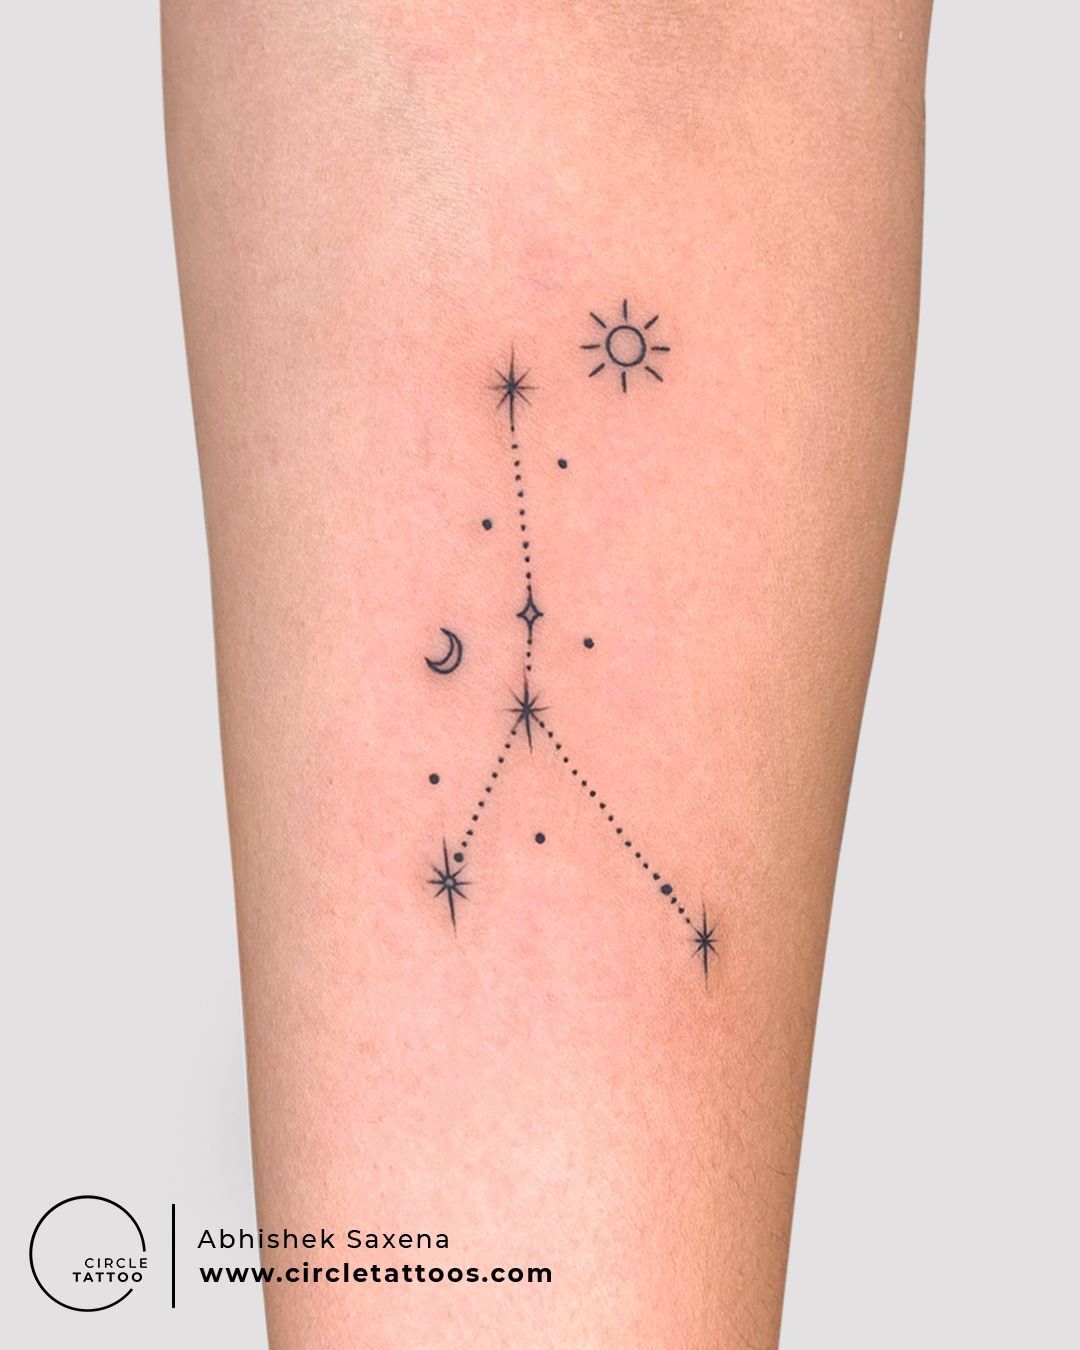 Naksh Tattoos - Capricorn constellation tattoo with some customisation .  For more such amazing tattoos on your skin, book an appointment on  9676751440. #tattoo #art #capricorn #geometrictattoo #customizedtattoo  #tattooist #tattoodesigns #customtattoos ...